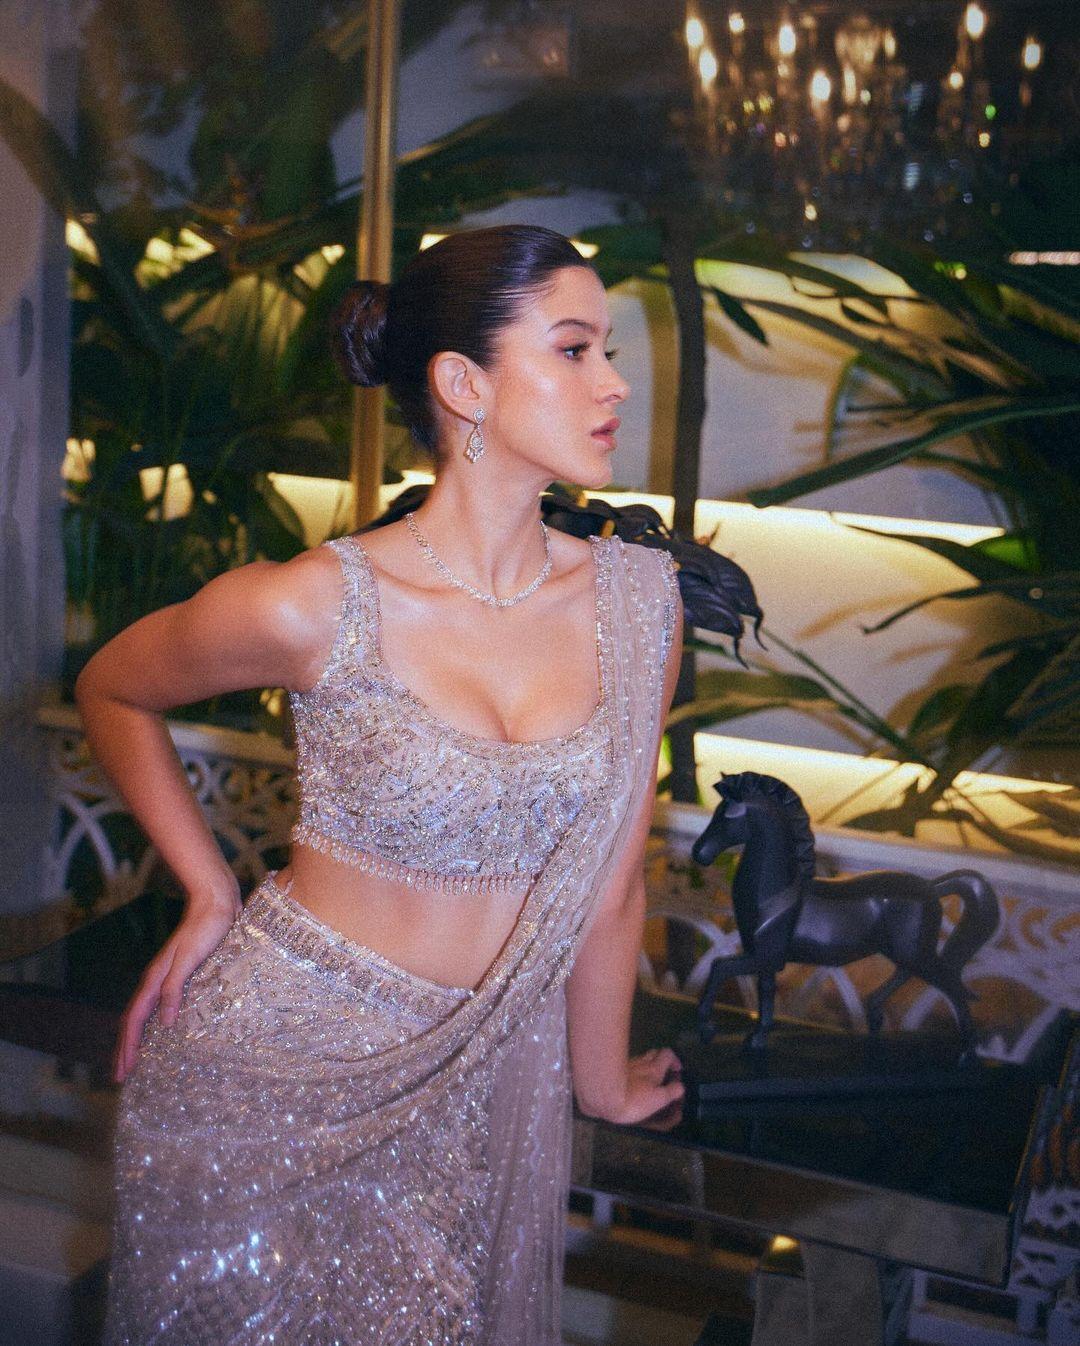 The starlet wore a creation by Falguni Shane and Peacock at a recent wedding. Shanaya's ensemble featured intricate zari work and exquisite embellishments